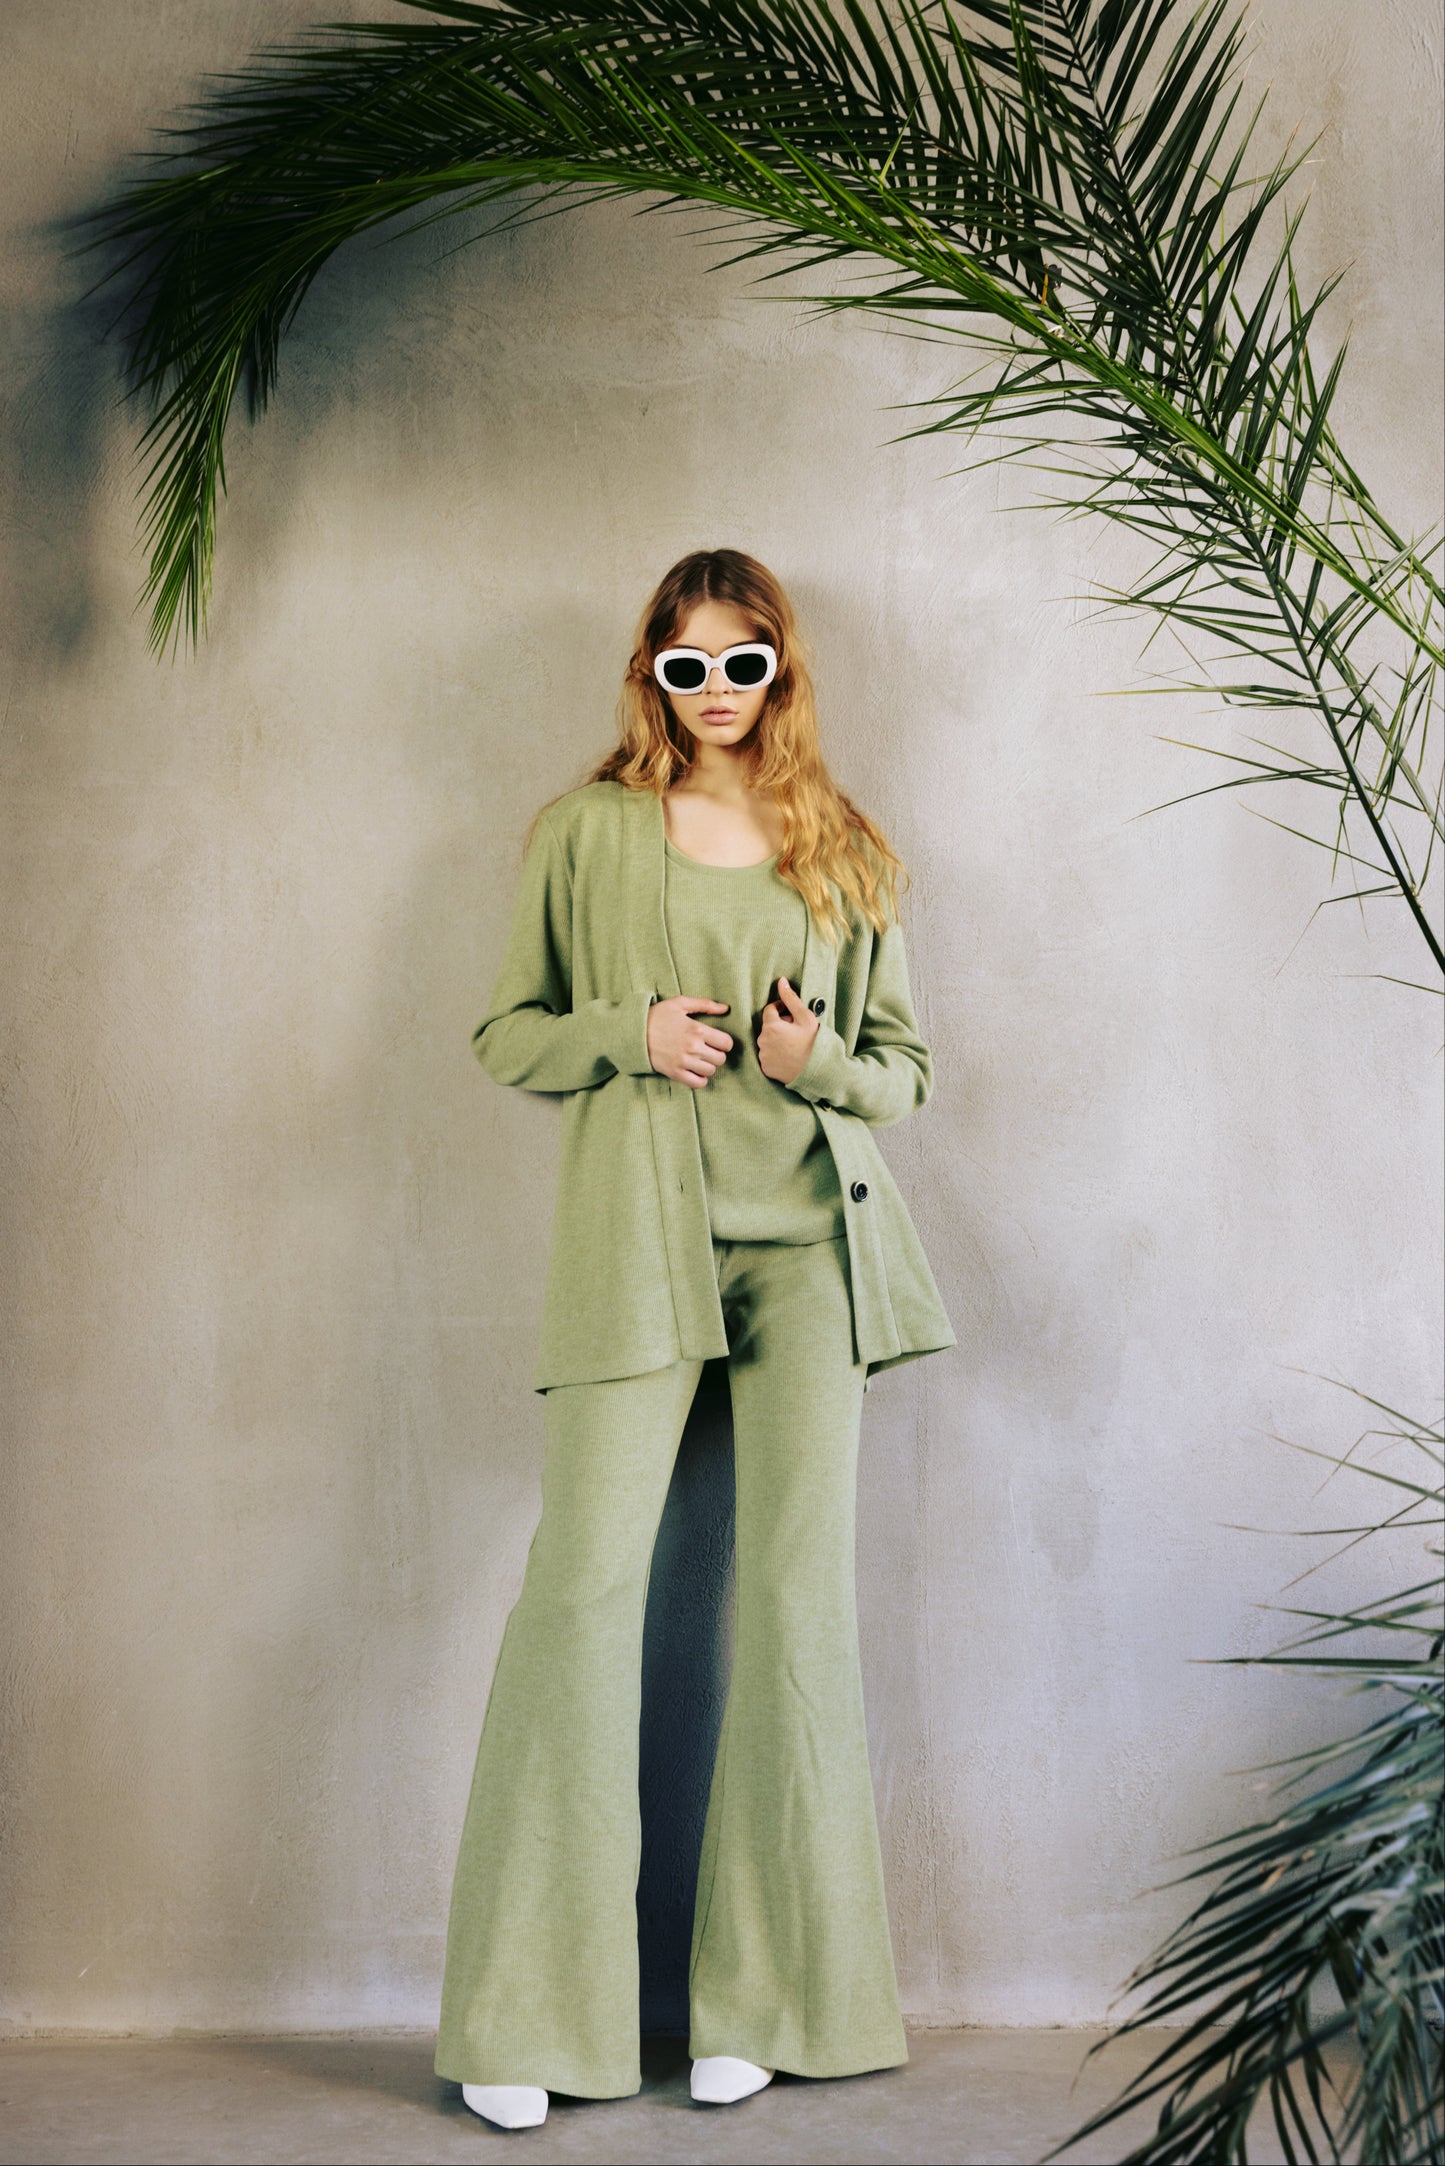 Casual Wooly Three-Piece Suit Green